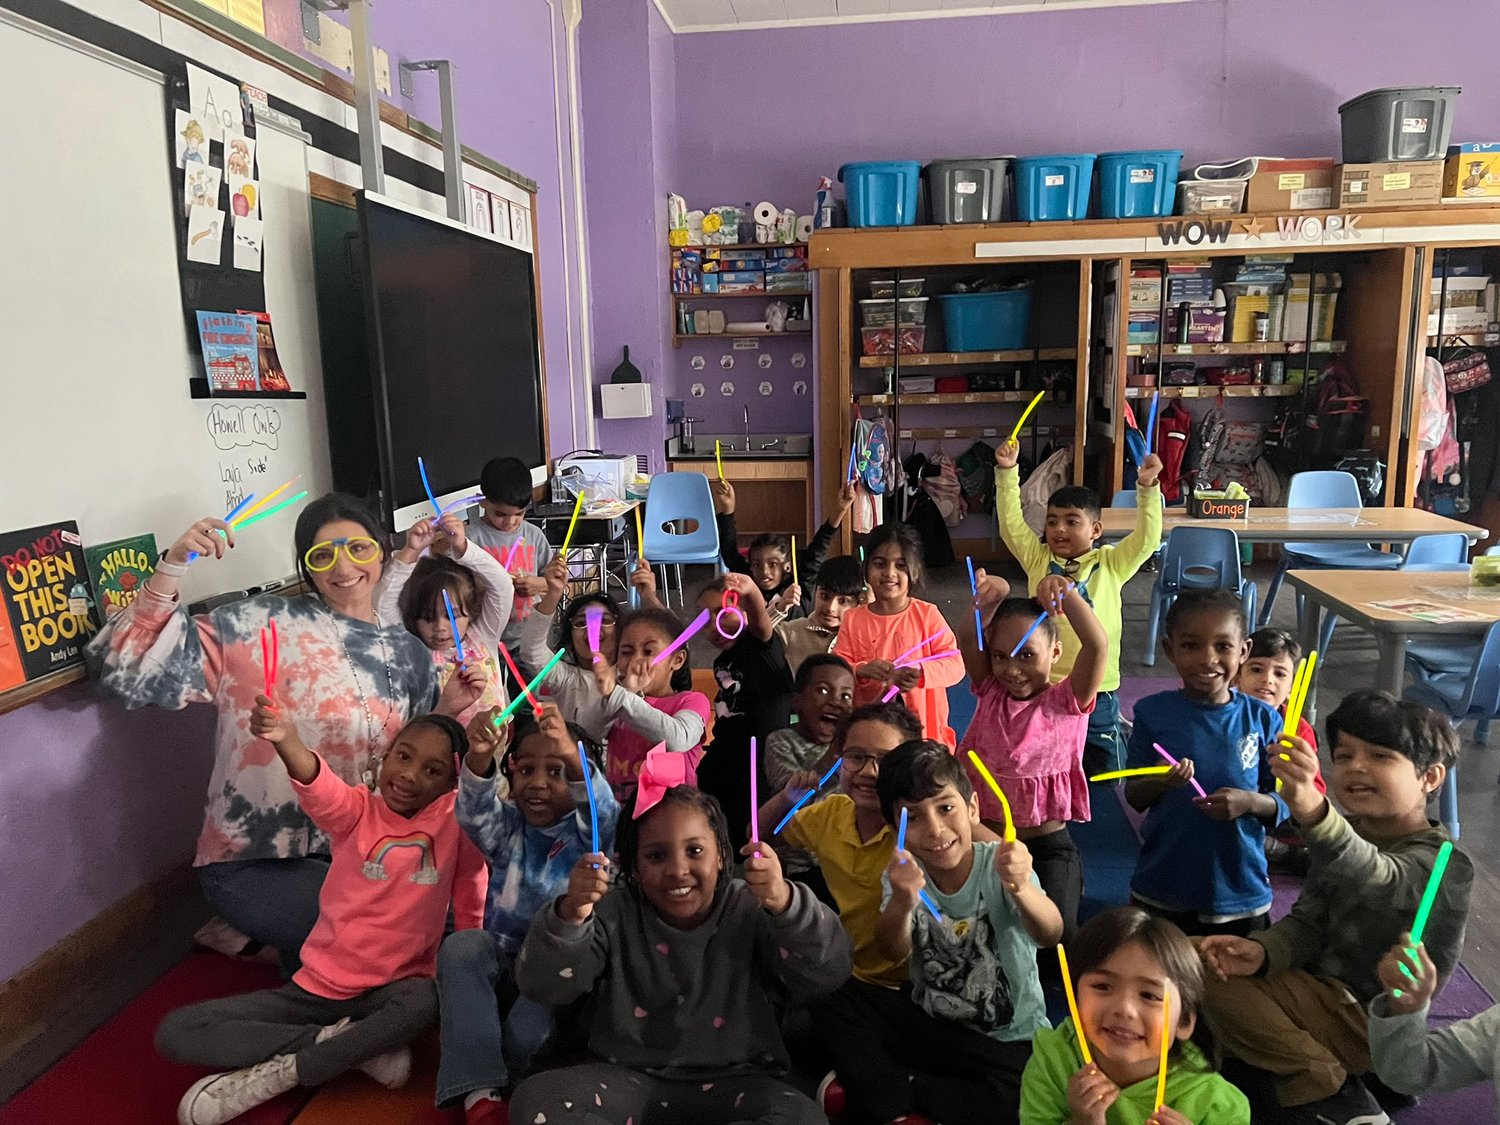 Howell Road Elementary School students celebrated Red Ribbon Week with glow sticks and wearing colorful outfits on their drug prevention theme day: “My Future is Too Bright for Drugs Day.”